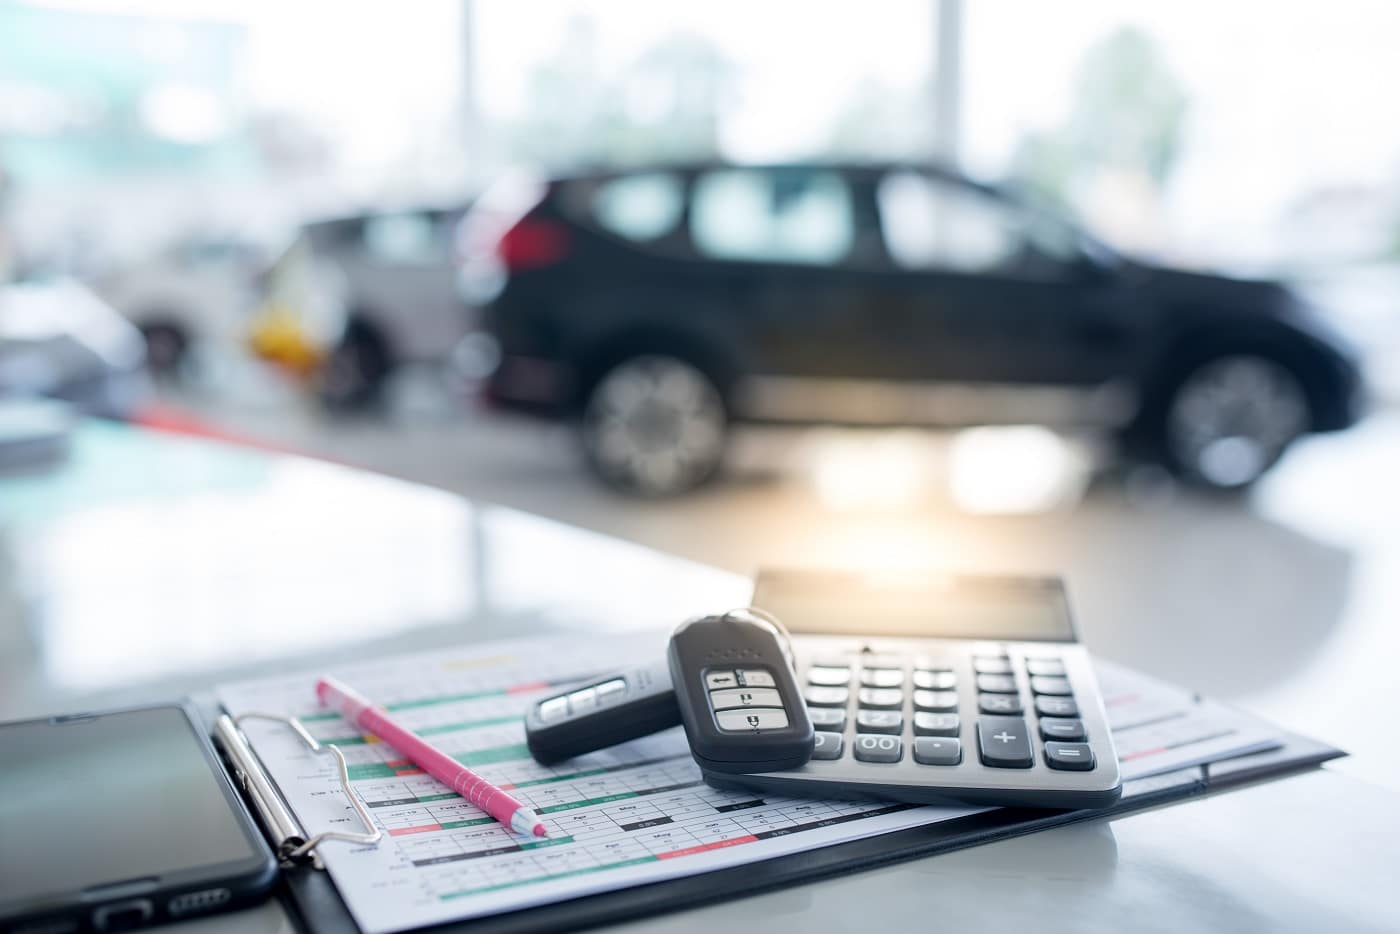 Do you have any experience in purchasing the used cars?